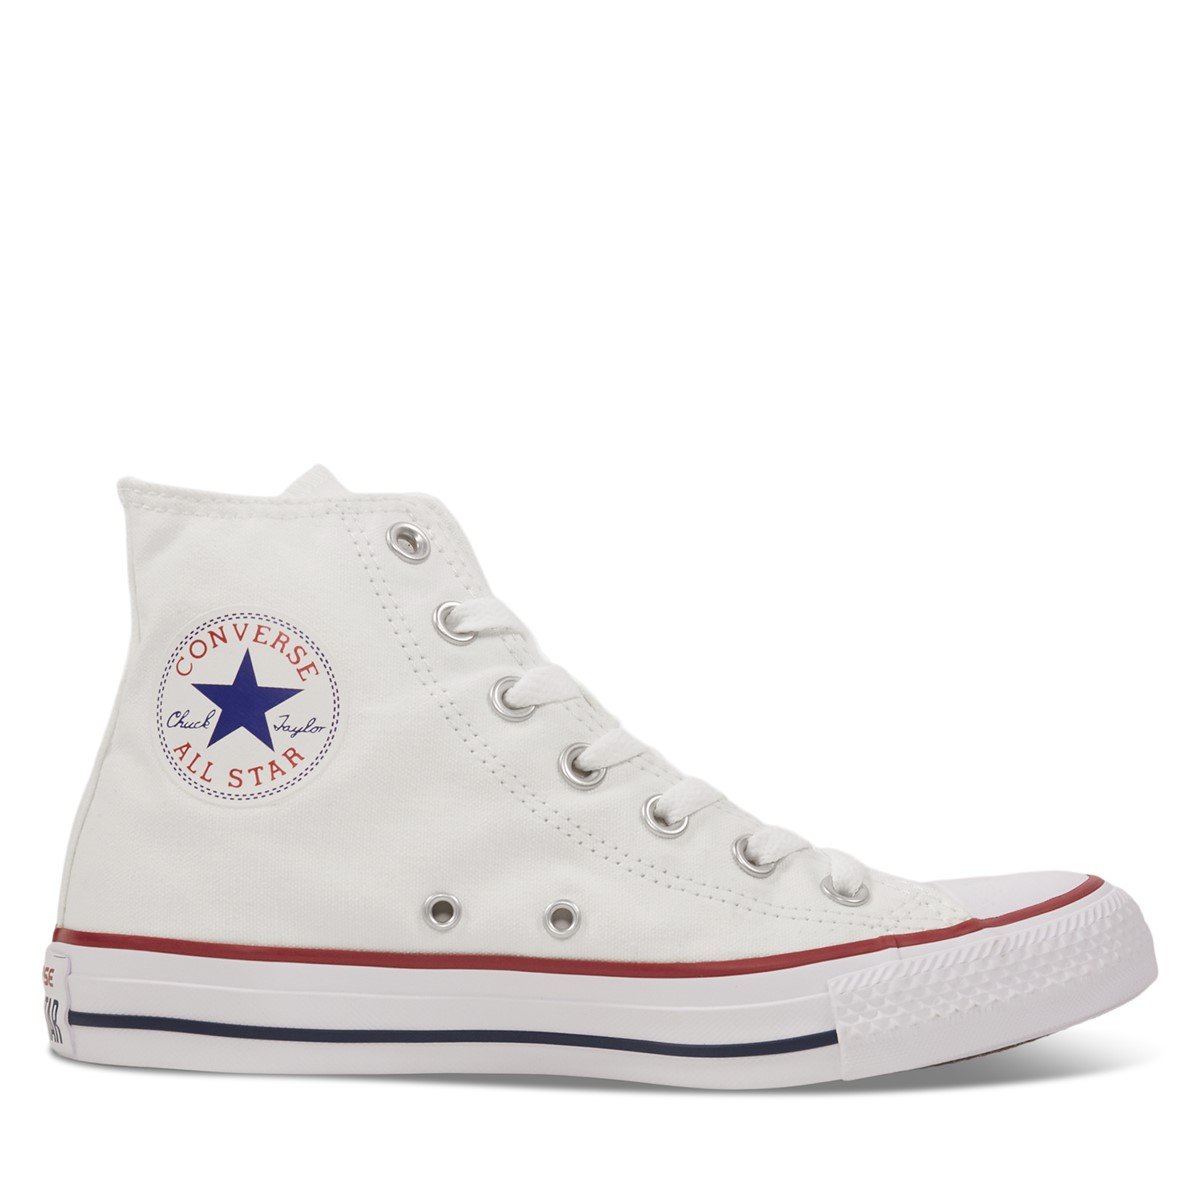 Chuck Taylor High Top Sneakers in White 